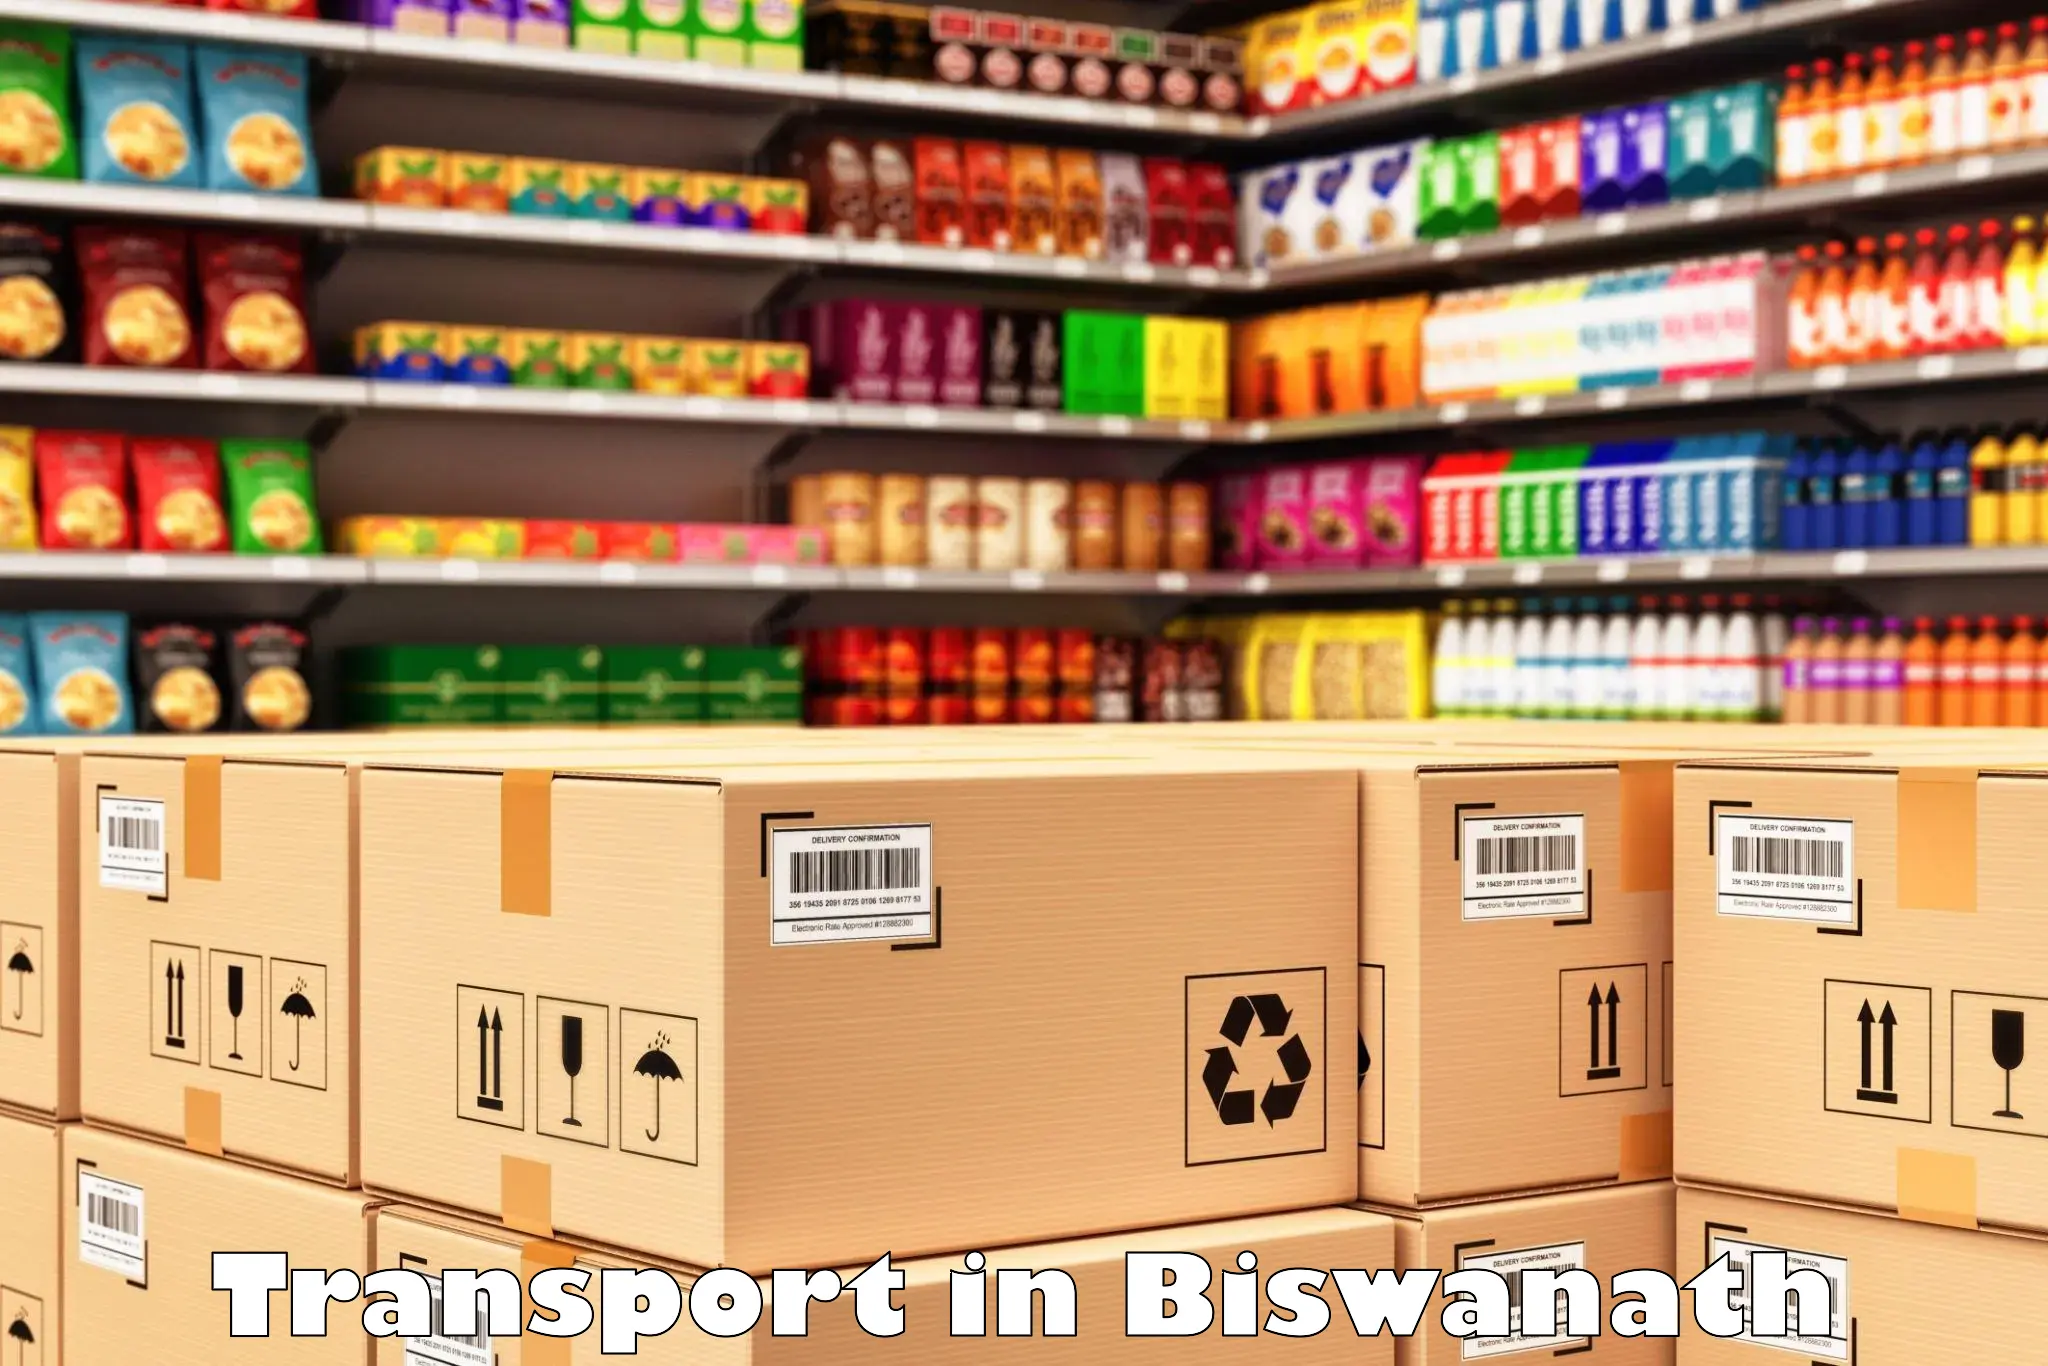 Delivery service in Biswanath